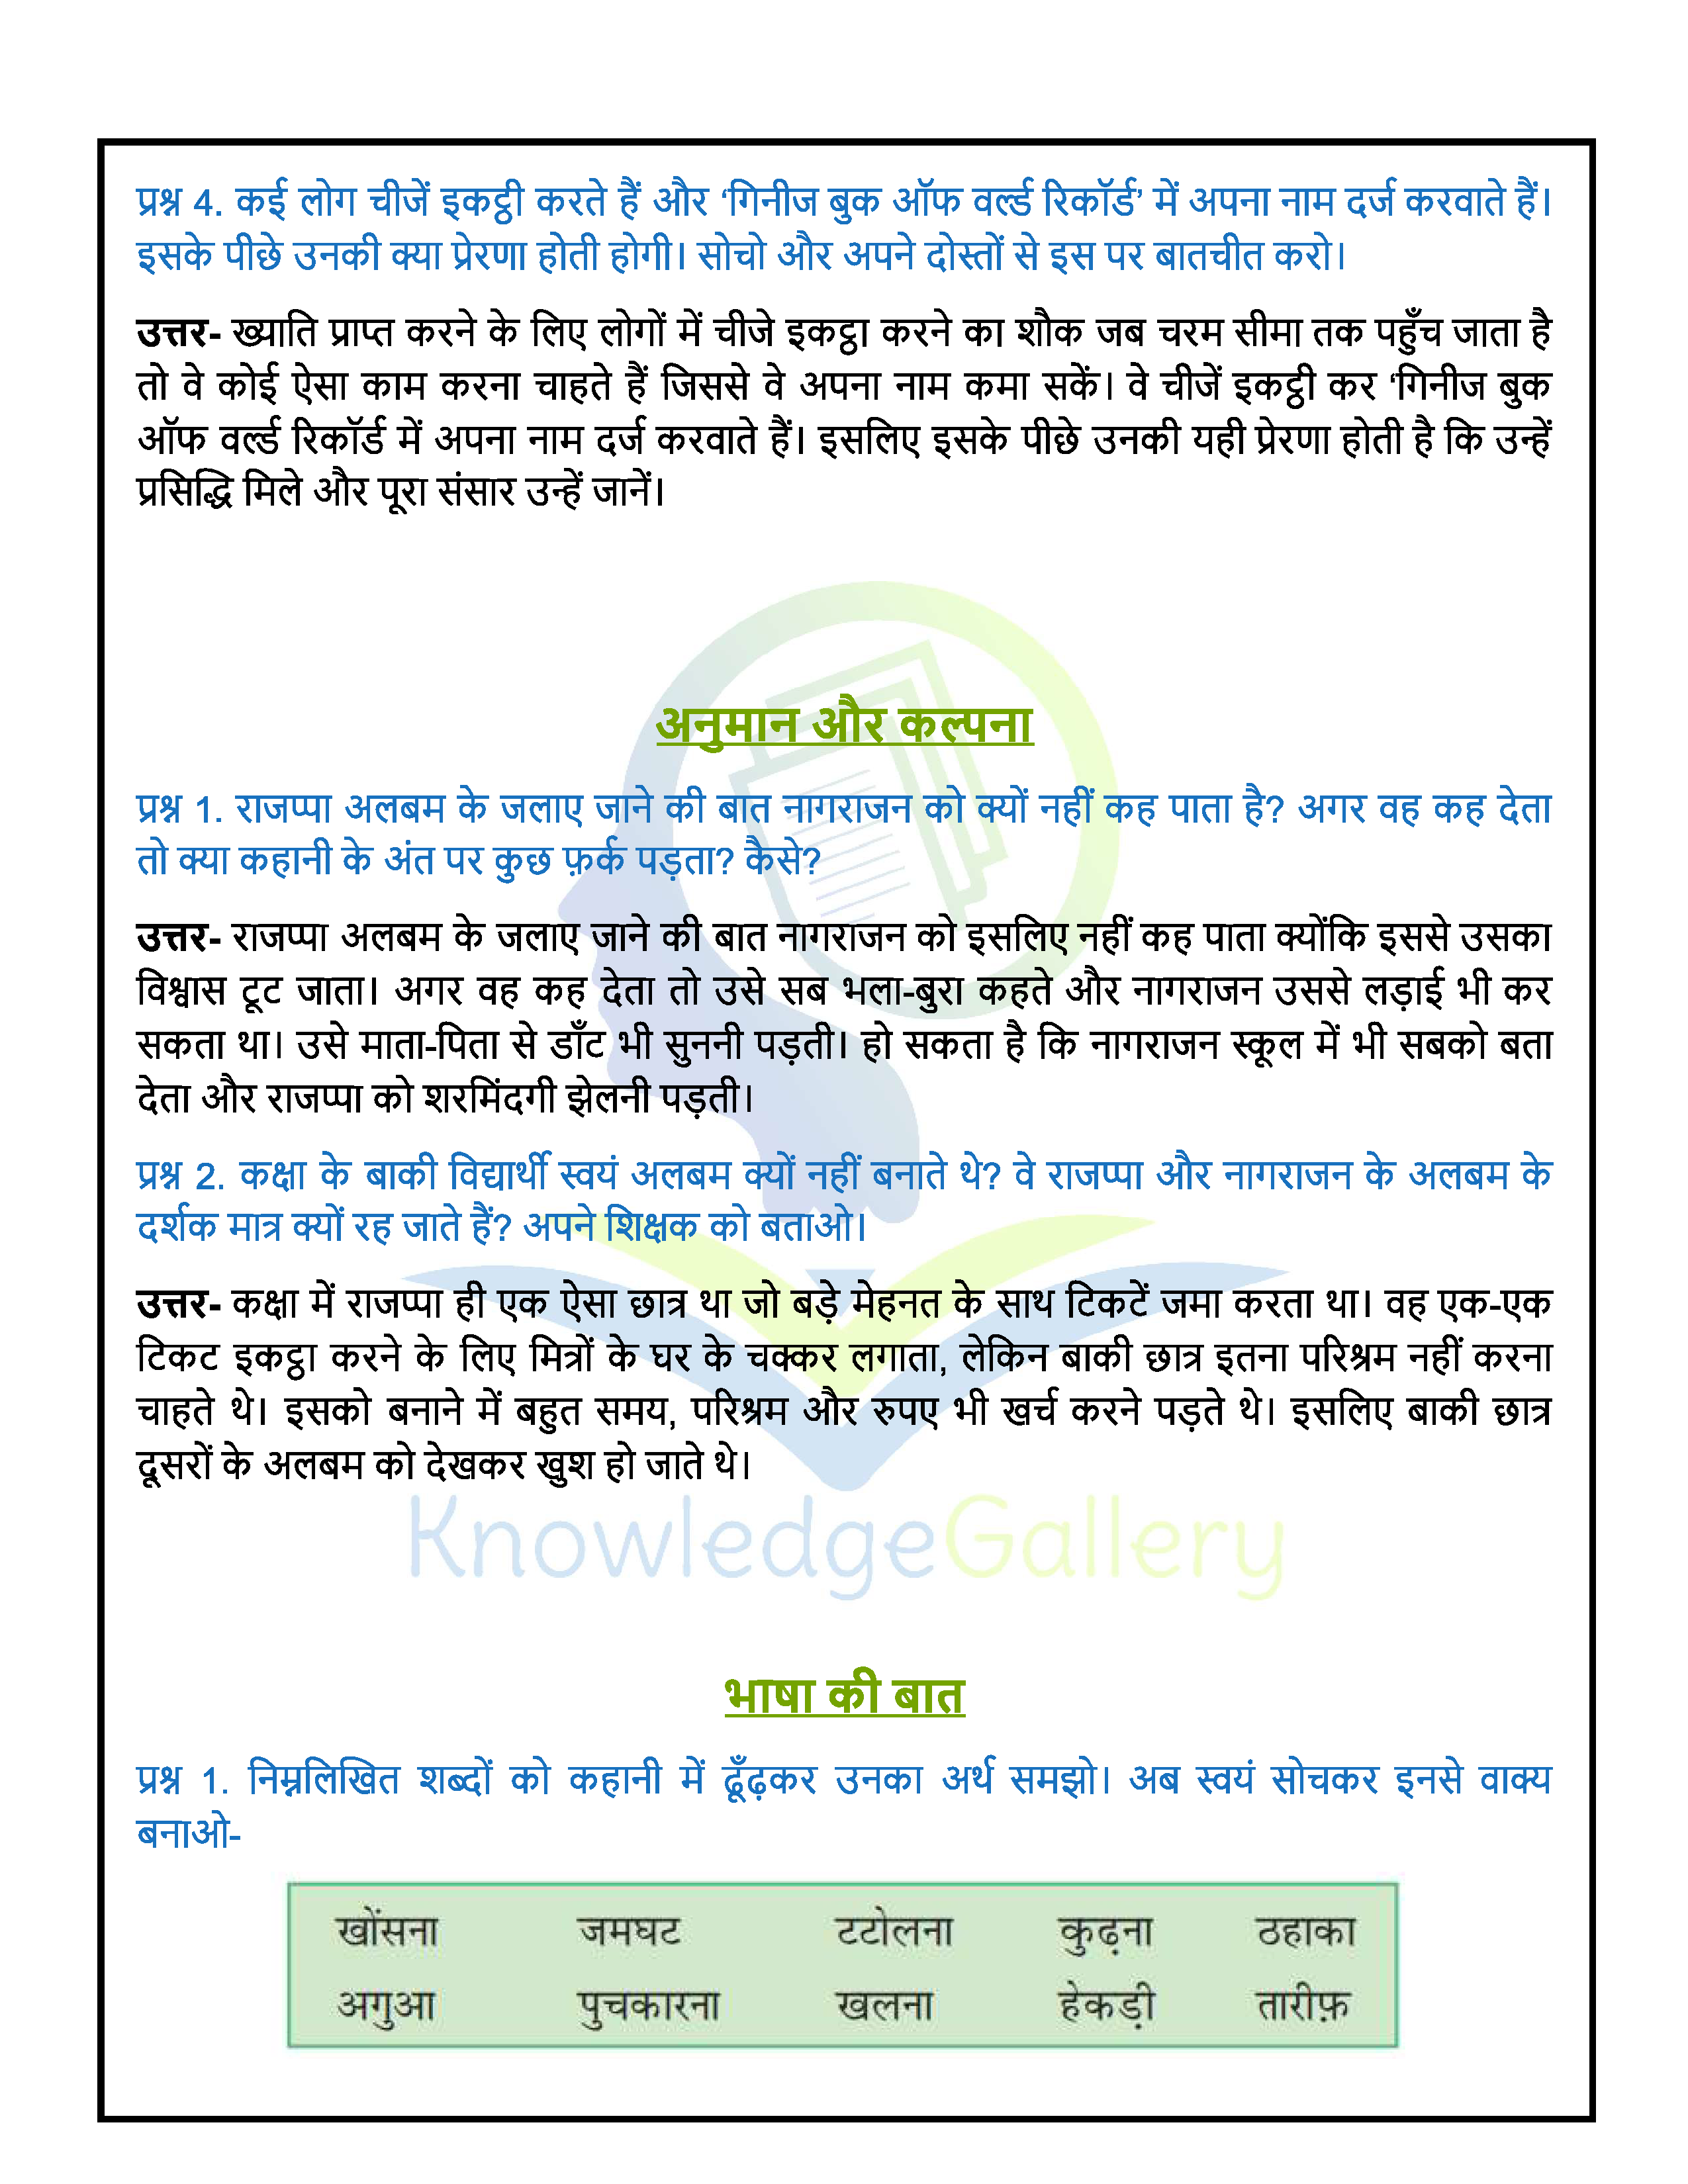 NCERT Solution For Class 6 Hindi Chapter 9 part 3